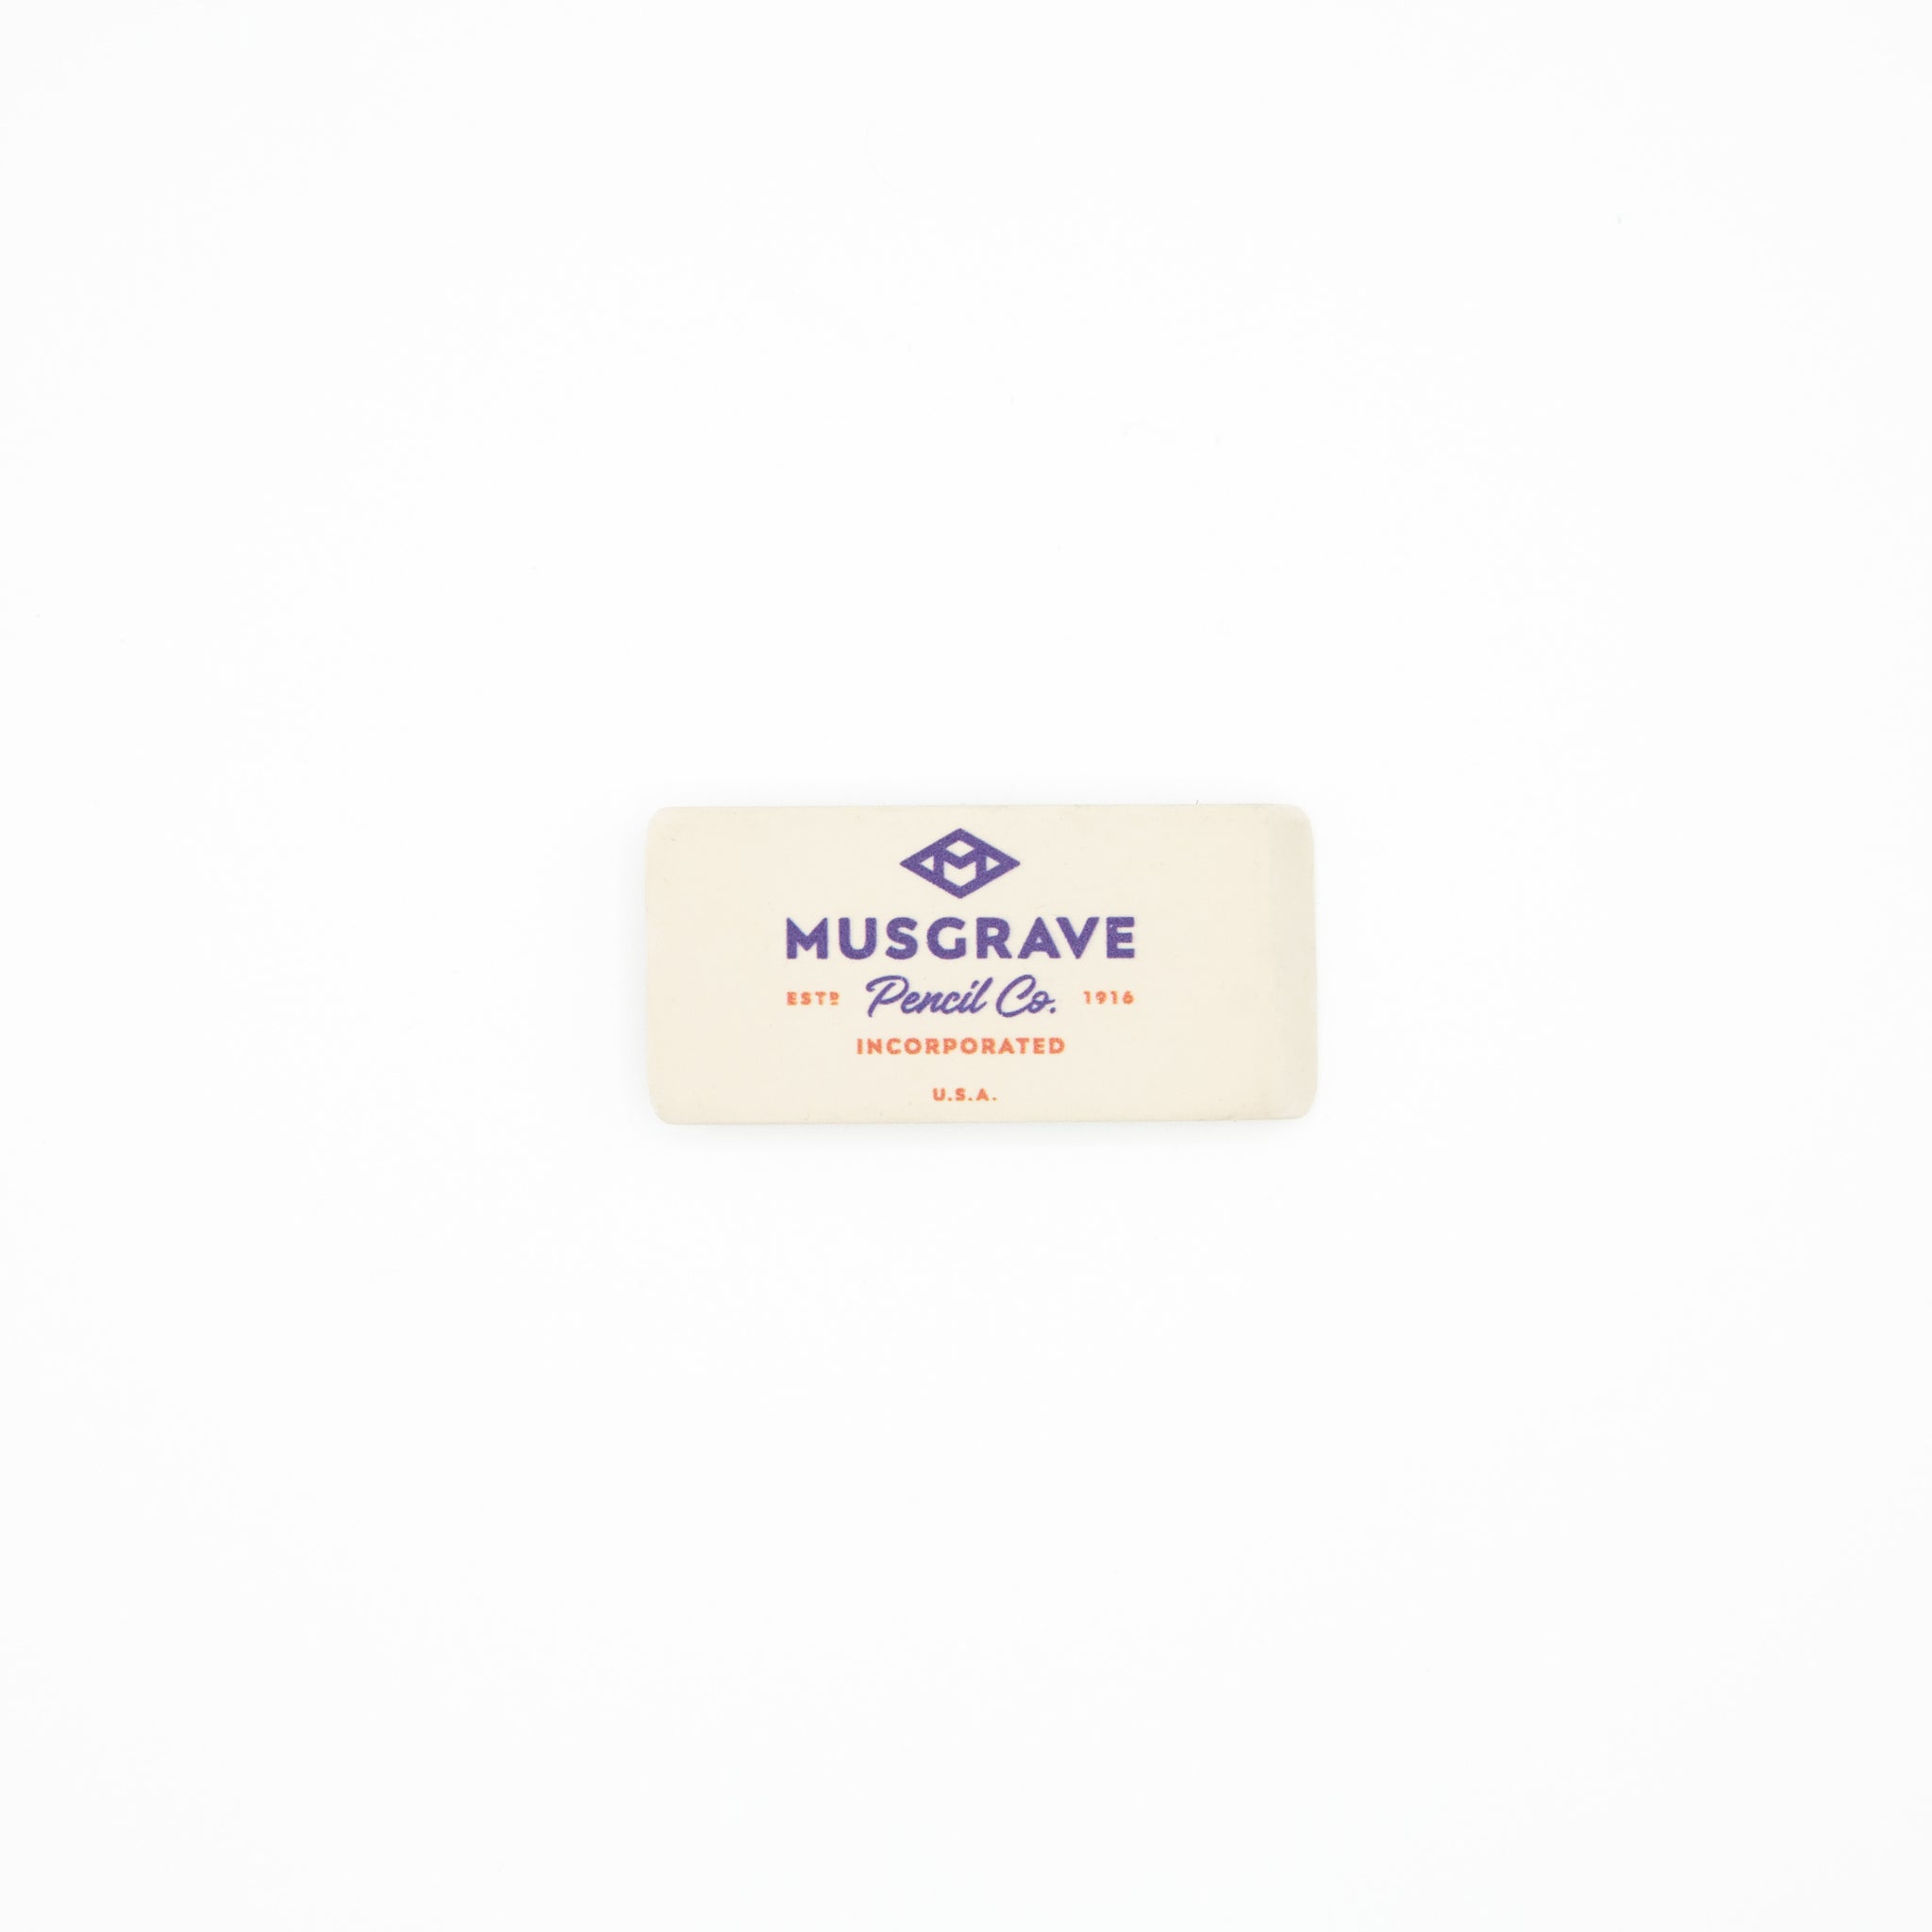 Musgrave Pencil MUSDCAPSA-2 Wedgecap Erasers Tub Assorted Color - Pack of 144